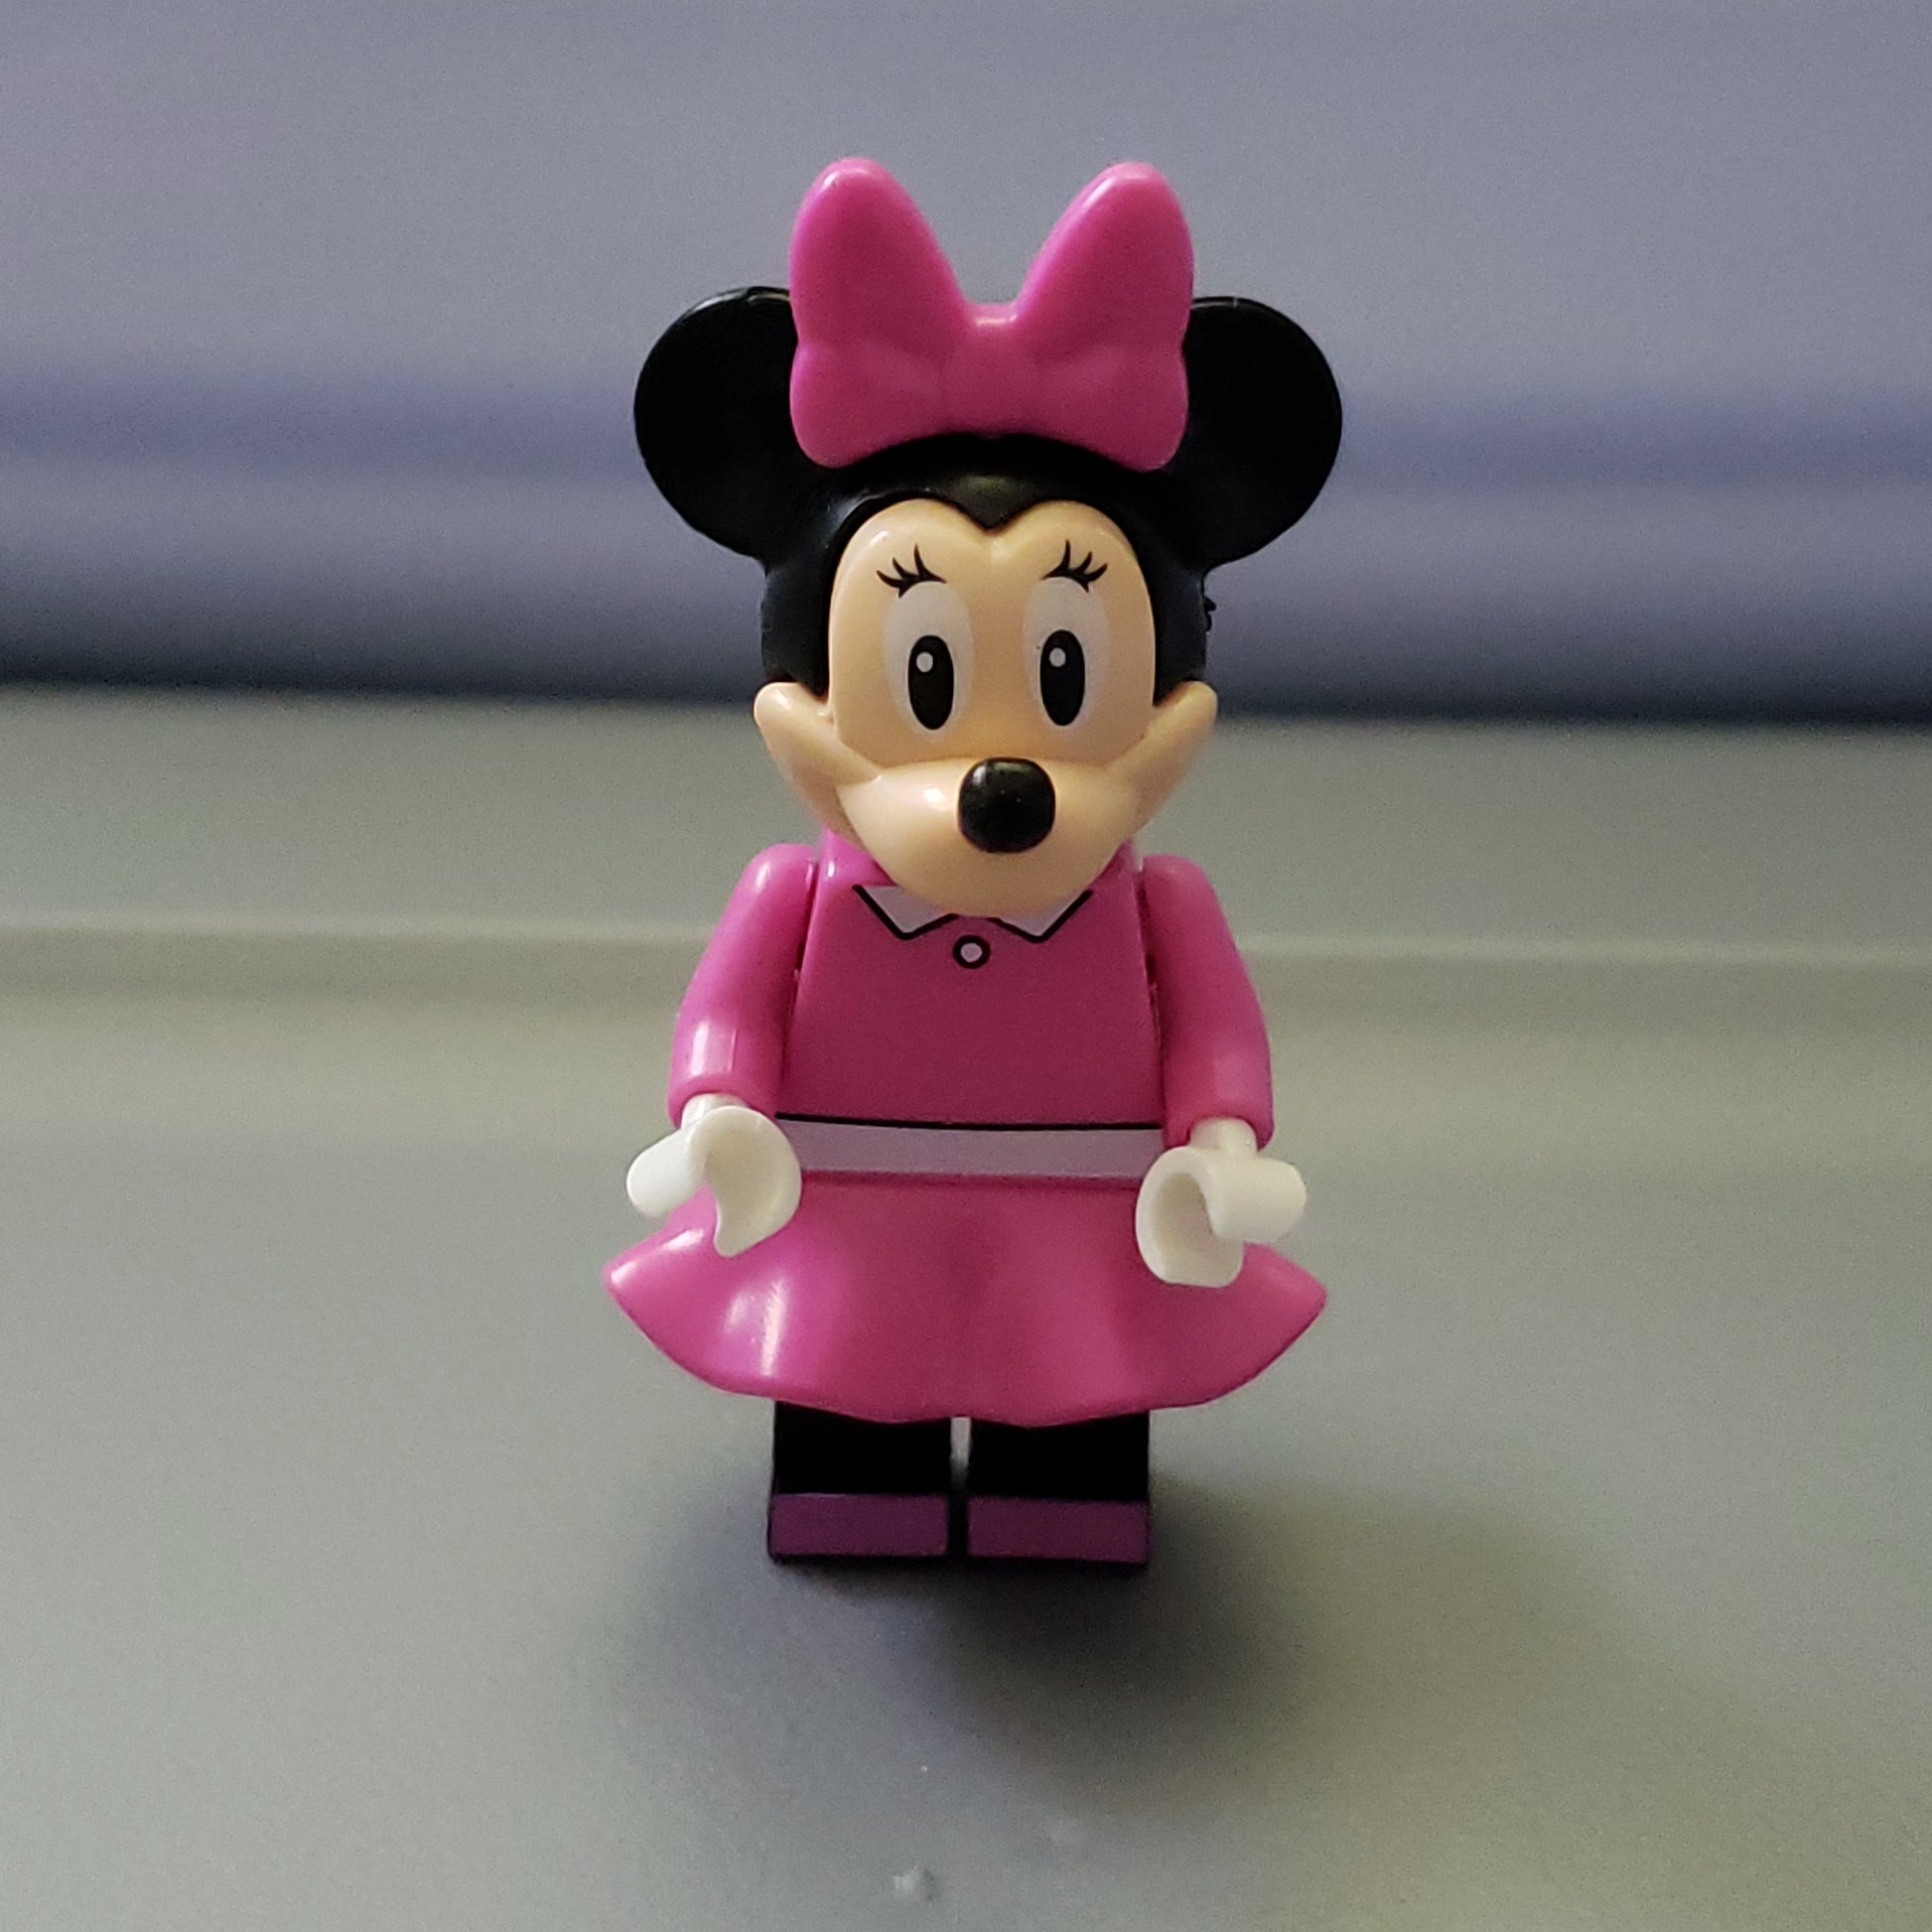 Custom Lego Compatible Minnie Mouse Minifig